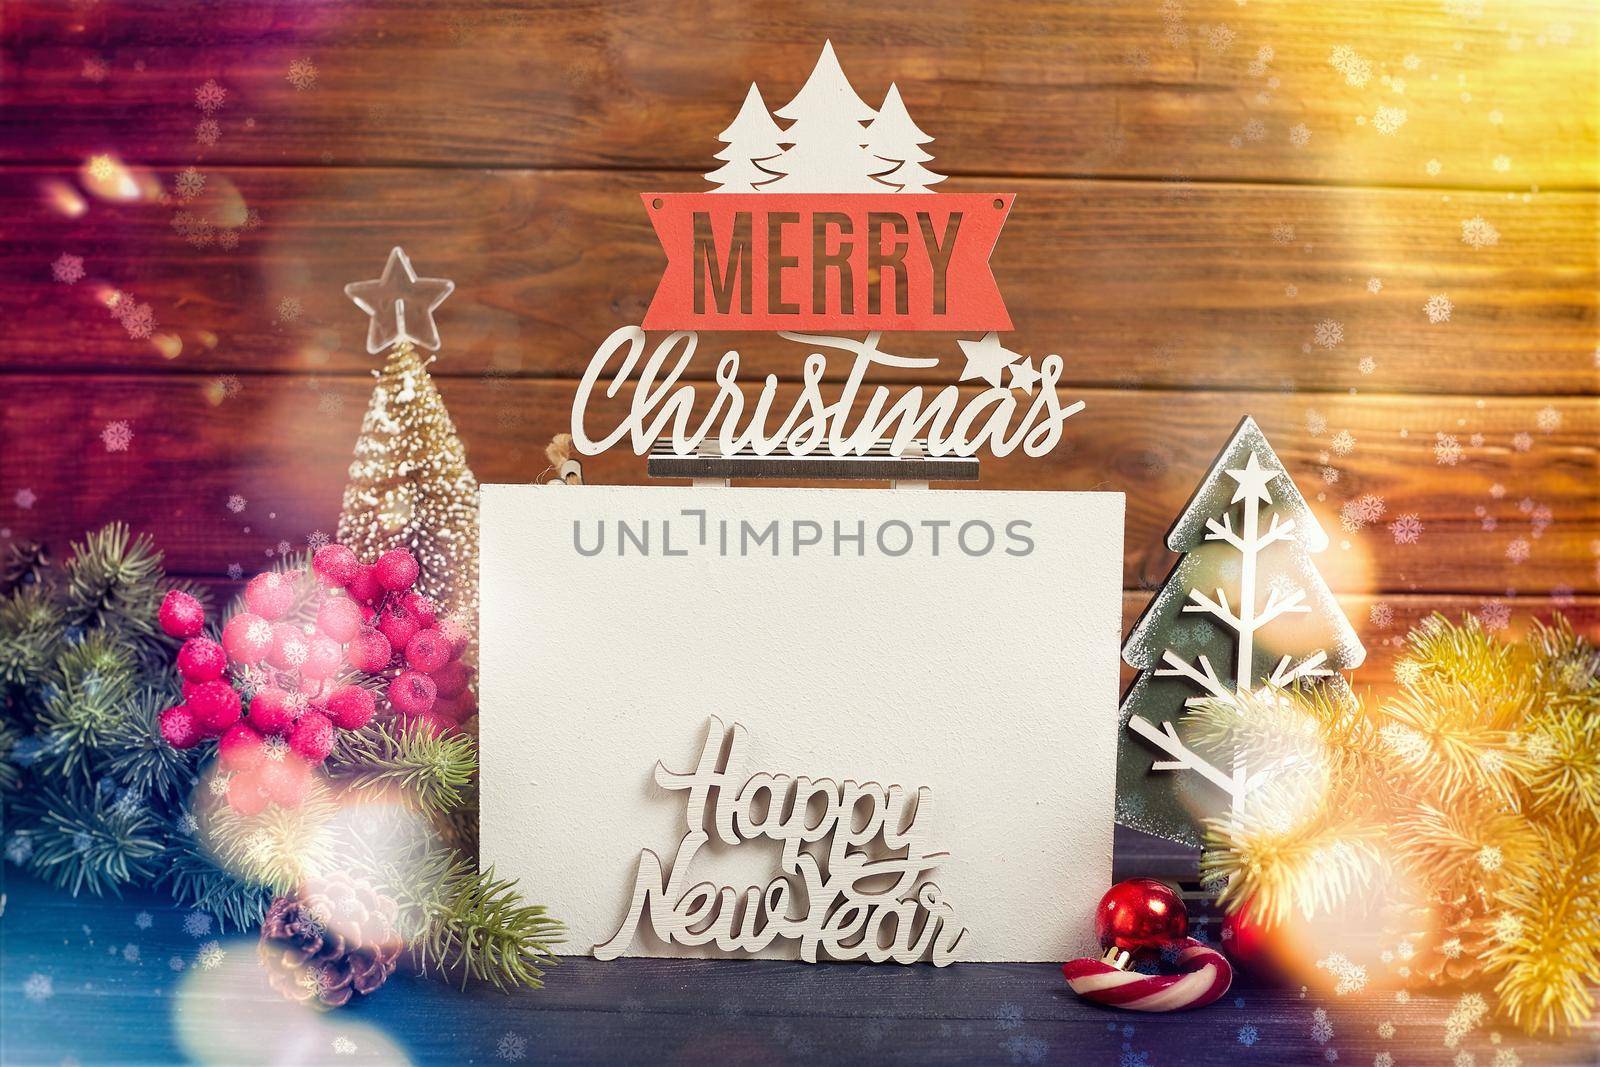 Christmas background with festive decoration and text , Merry Christmas and happy new year concept